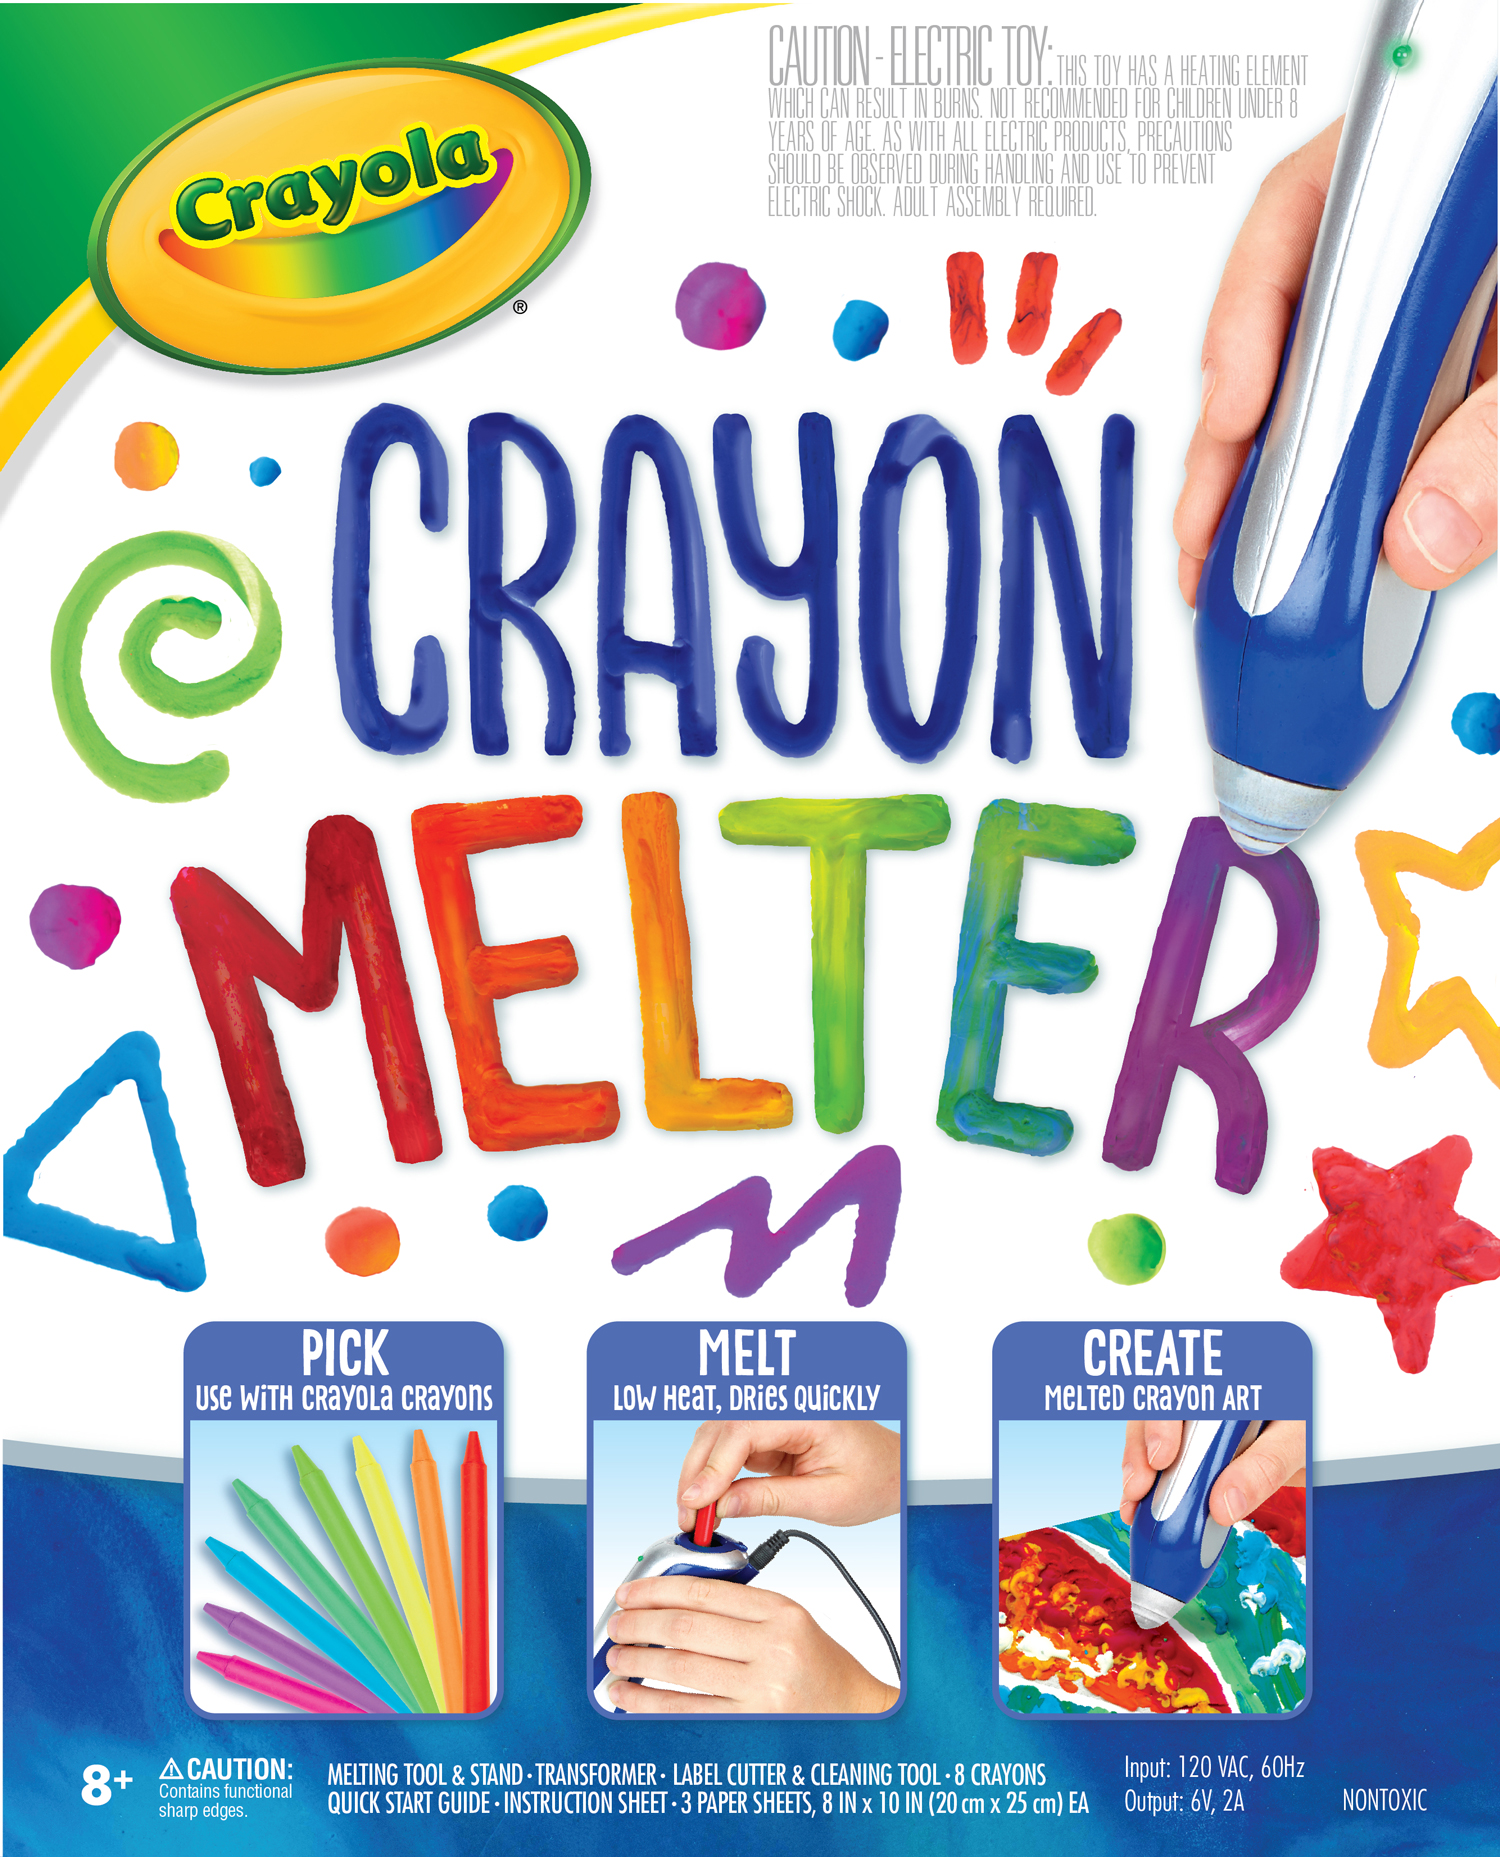 Crayola’s New Pen Writes On Any Surface Using Melted Crayons As Ink